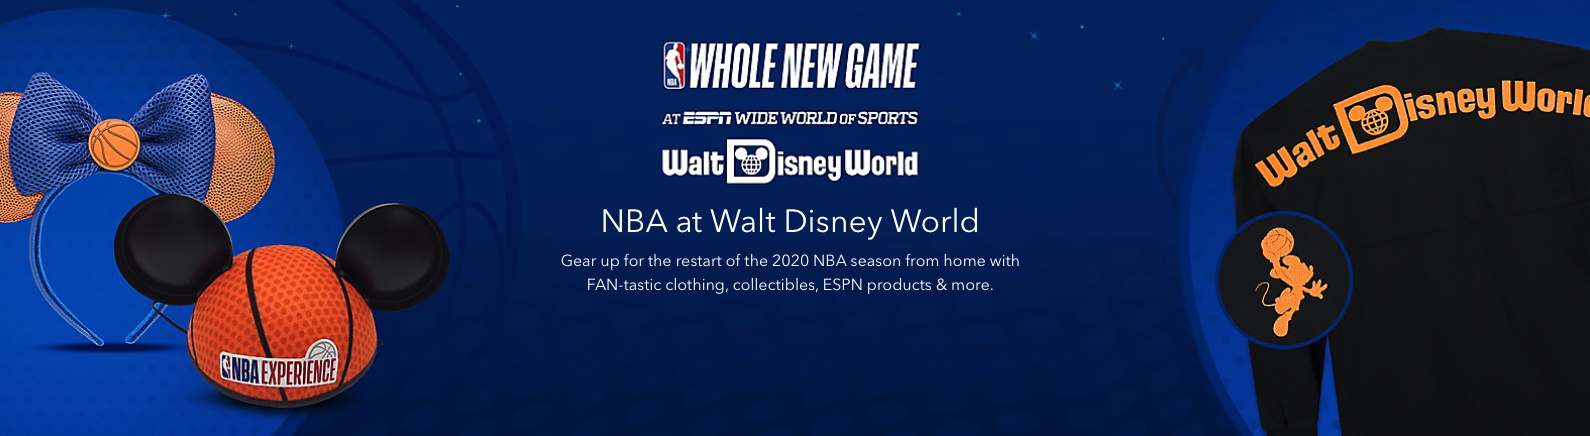 Looking for NBA-Themed Disney Merchandise?! TONS of Options Are Now  Available Online